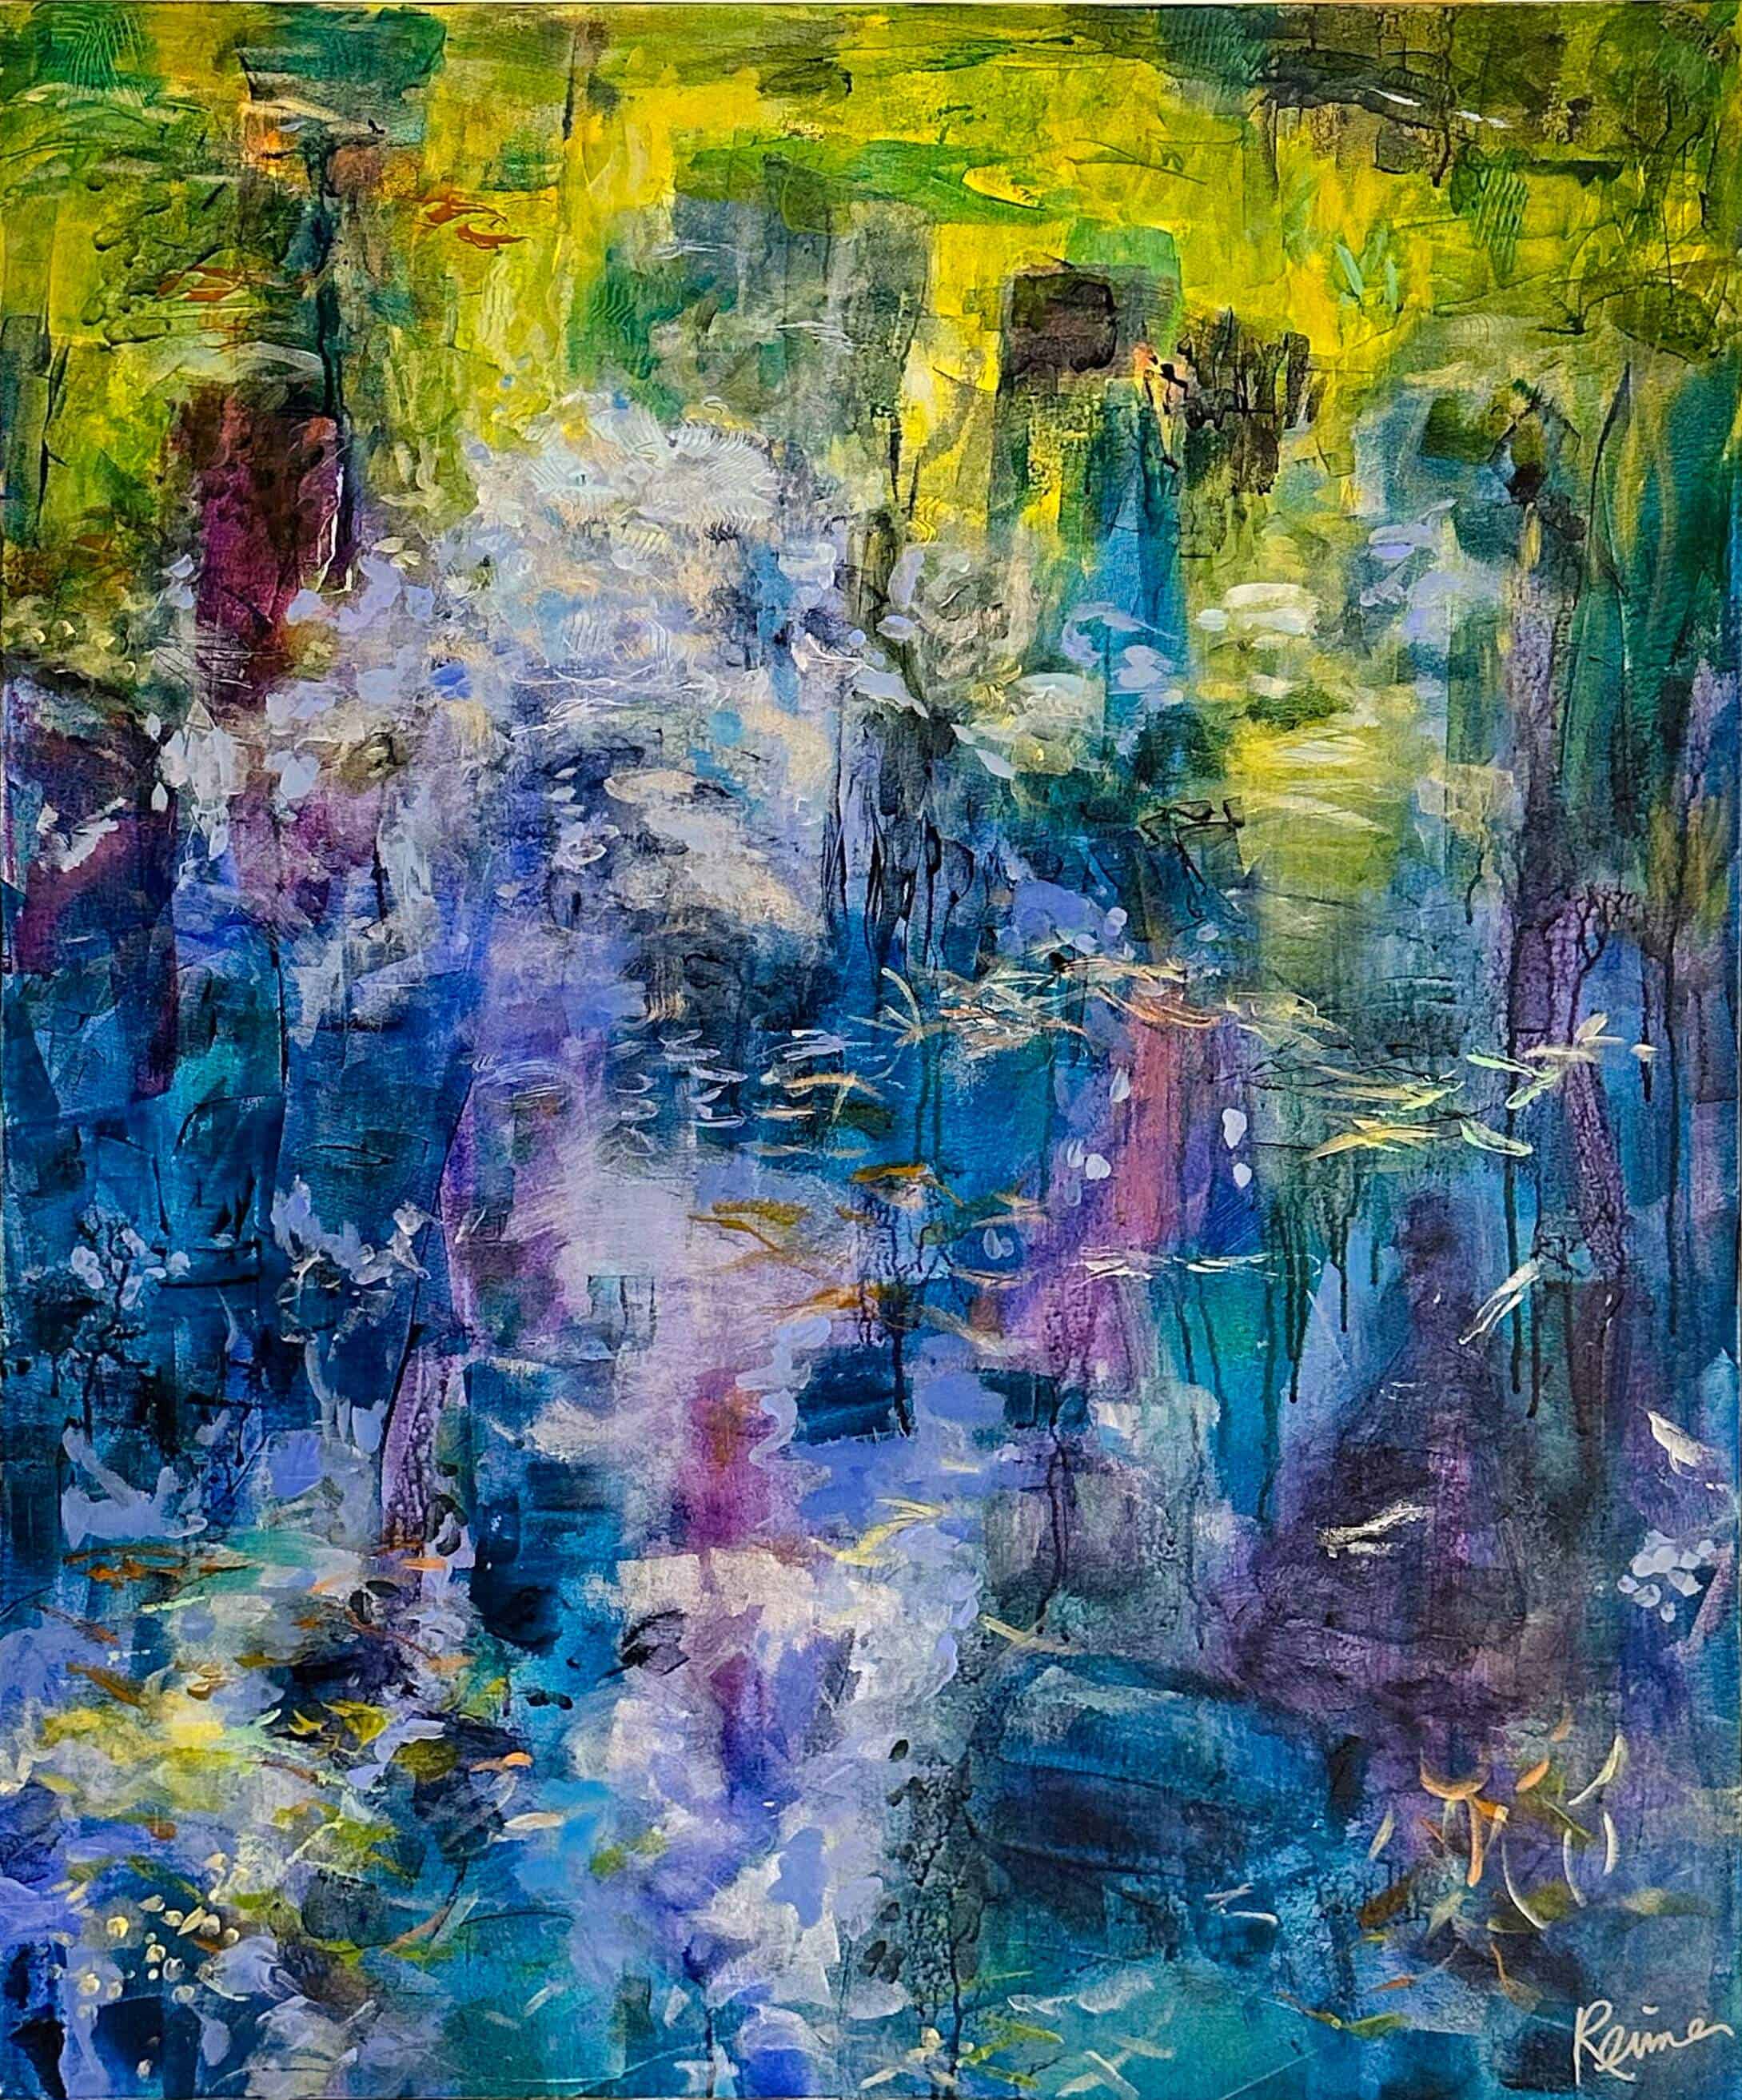 Abstract Art. Title: Marsh Reflections, Acrylic on Canvas, 36 x 30 in by Contemporary Canadian Artist Christine Reimer.